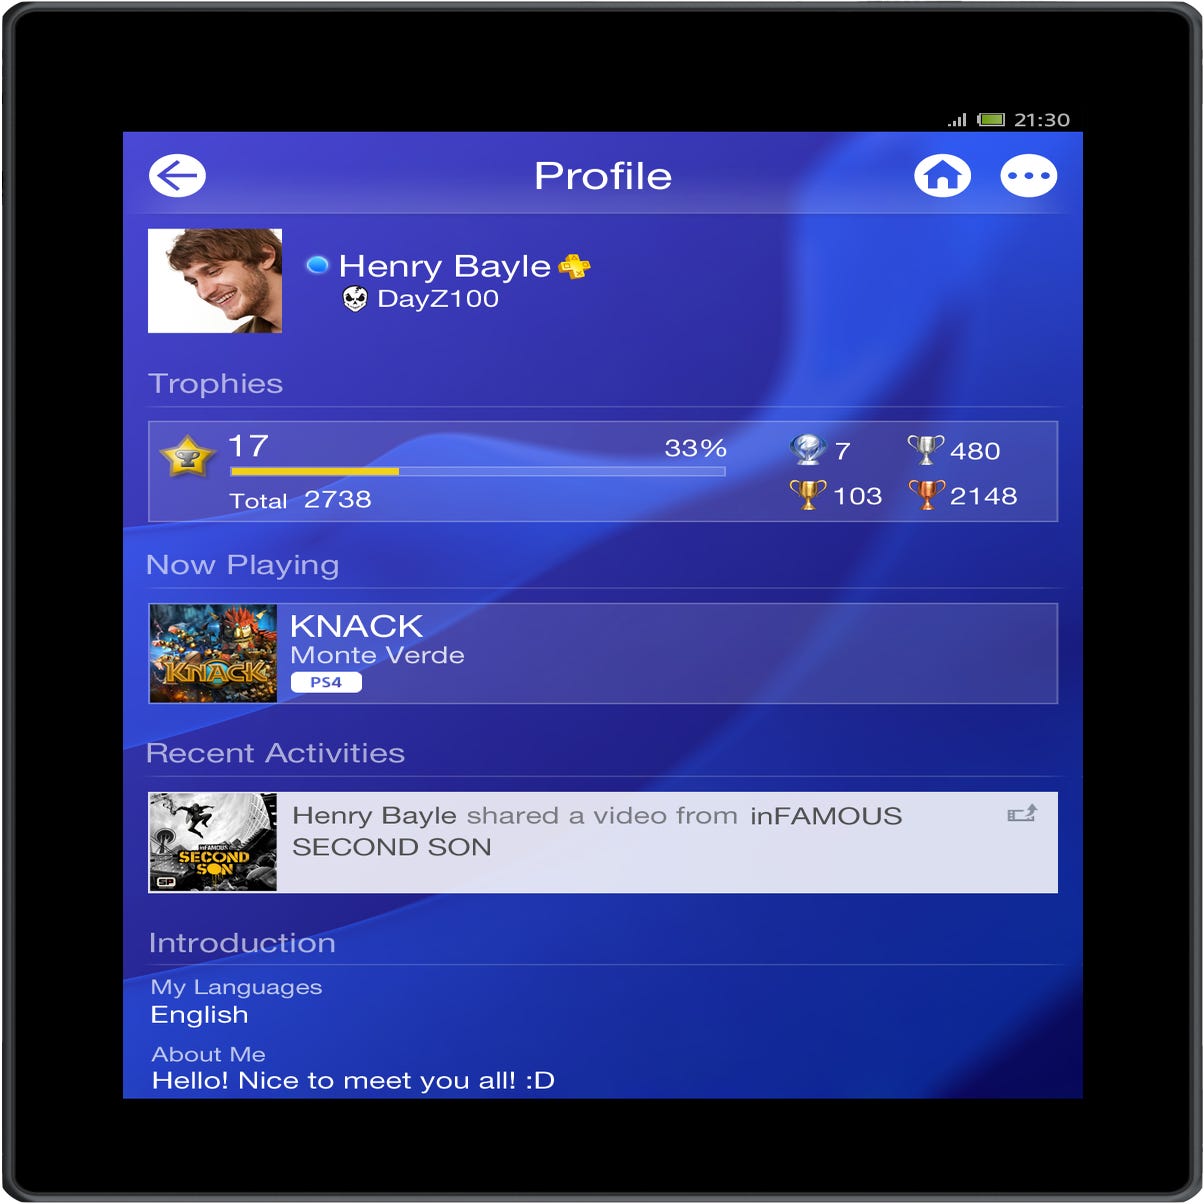 Sony details free PlayStation App with remote download support - GameSpot